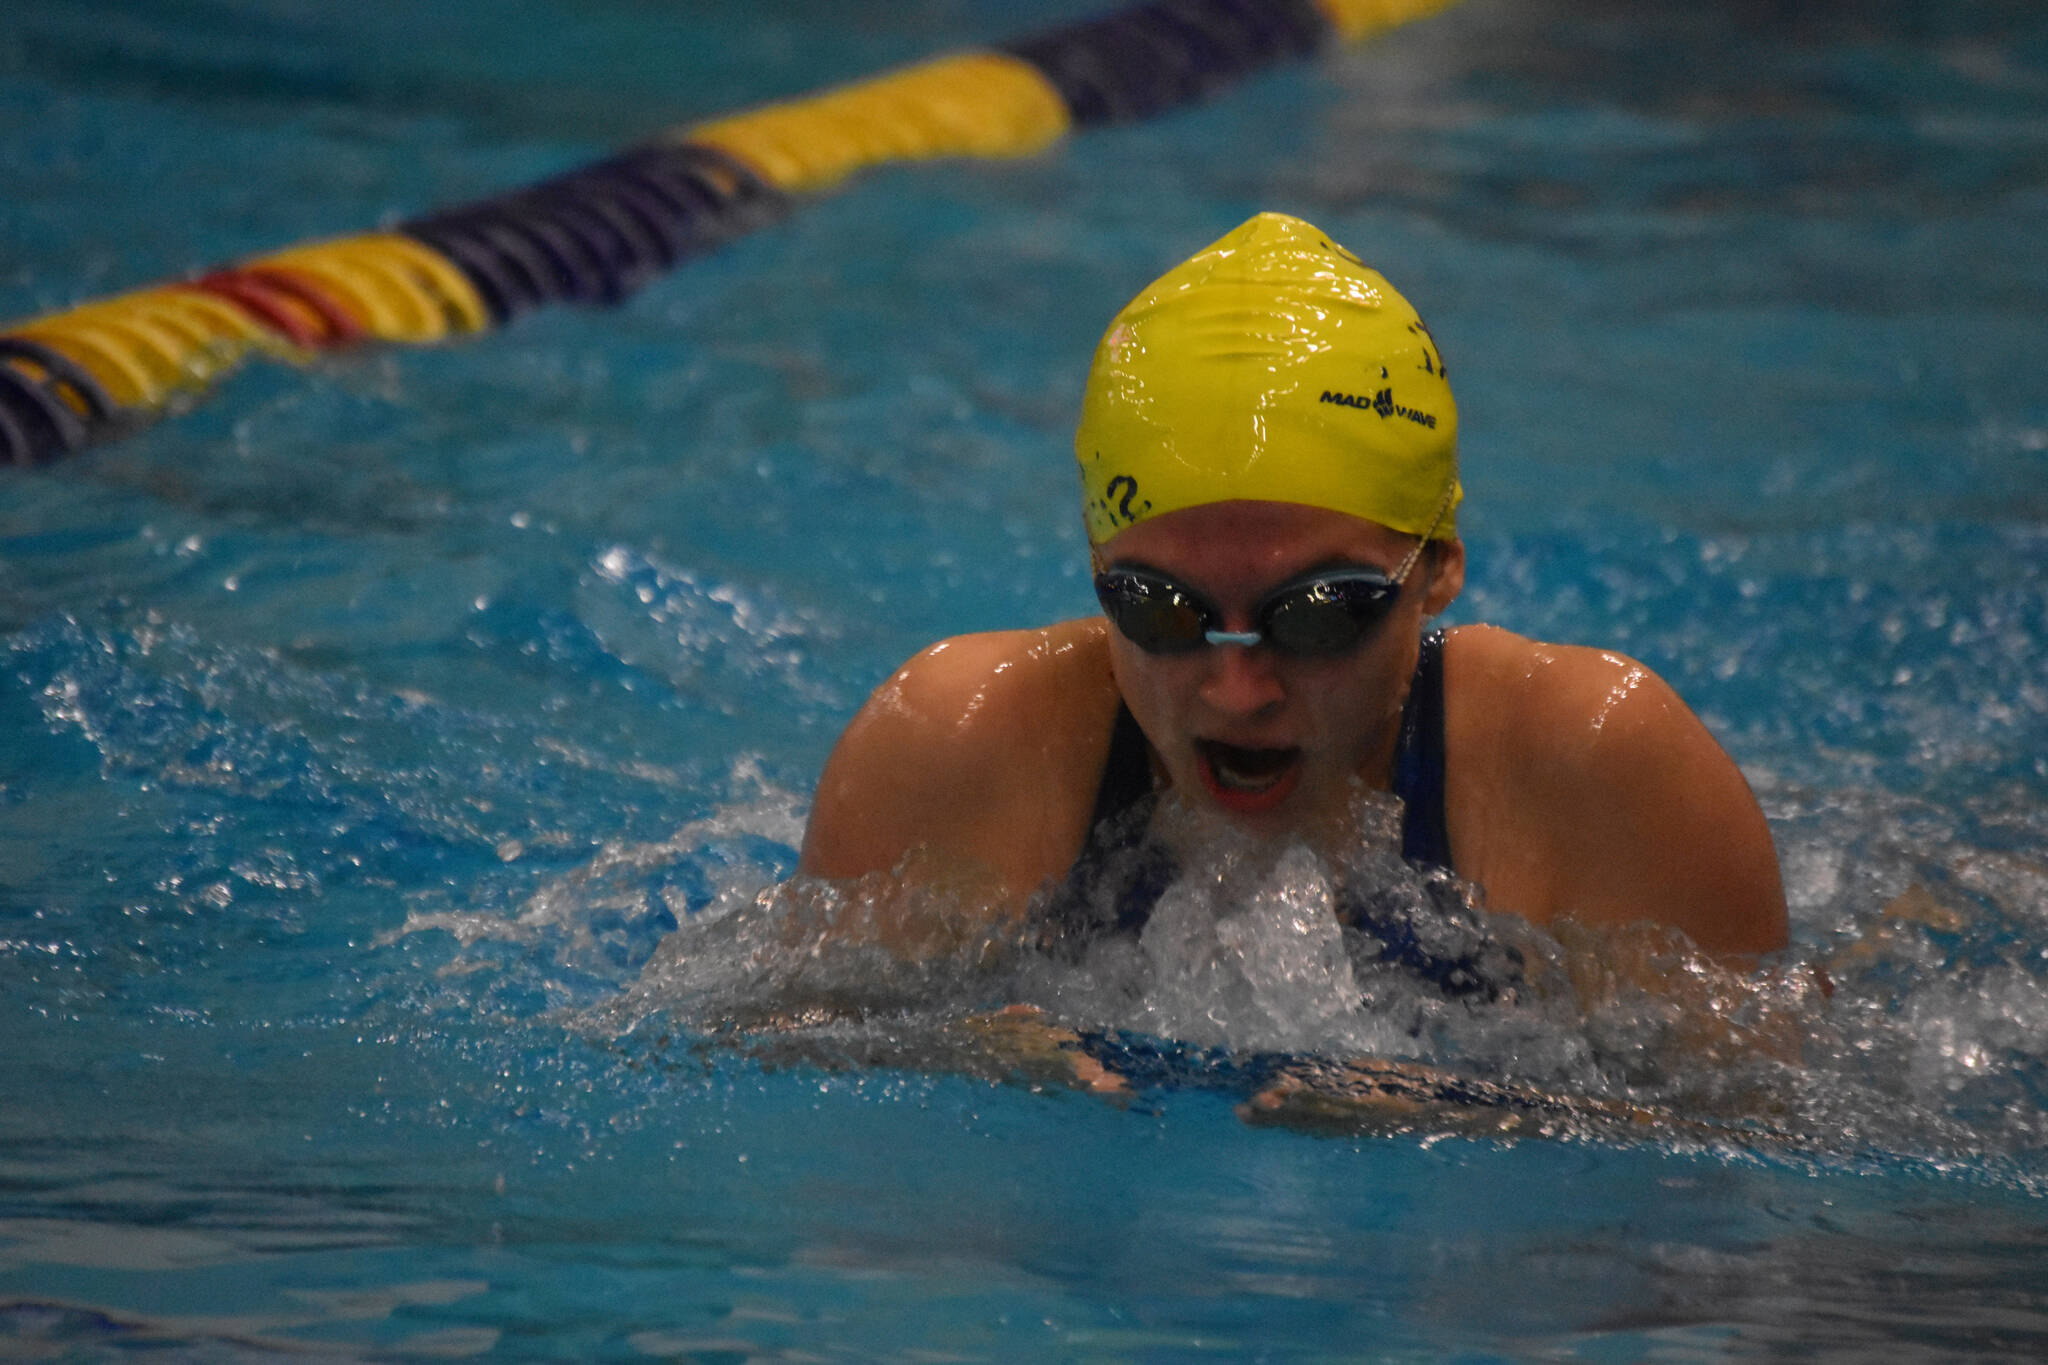 Annabelle Franciscone, of Homer, swims the 100-yard breaststroke during finals at the ASAA State Swim & Dive Championships on Saturday, Nov. 5, 2022, at Bartlett High School in Anchorage, Alaska.